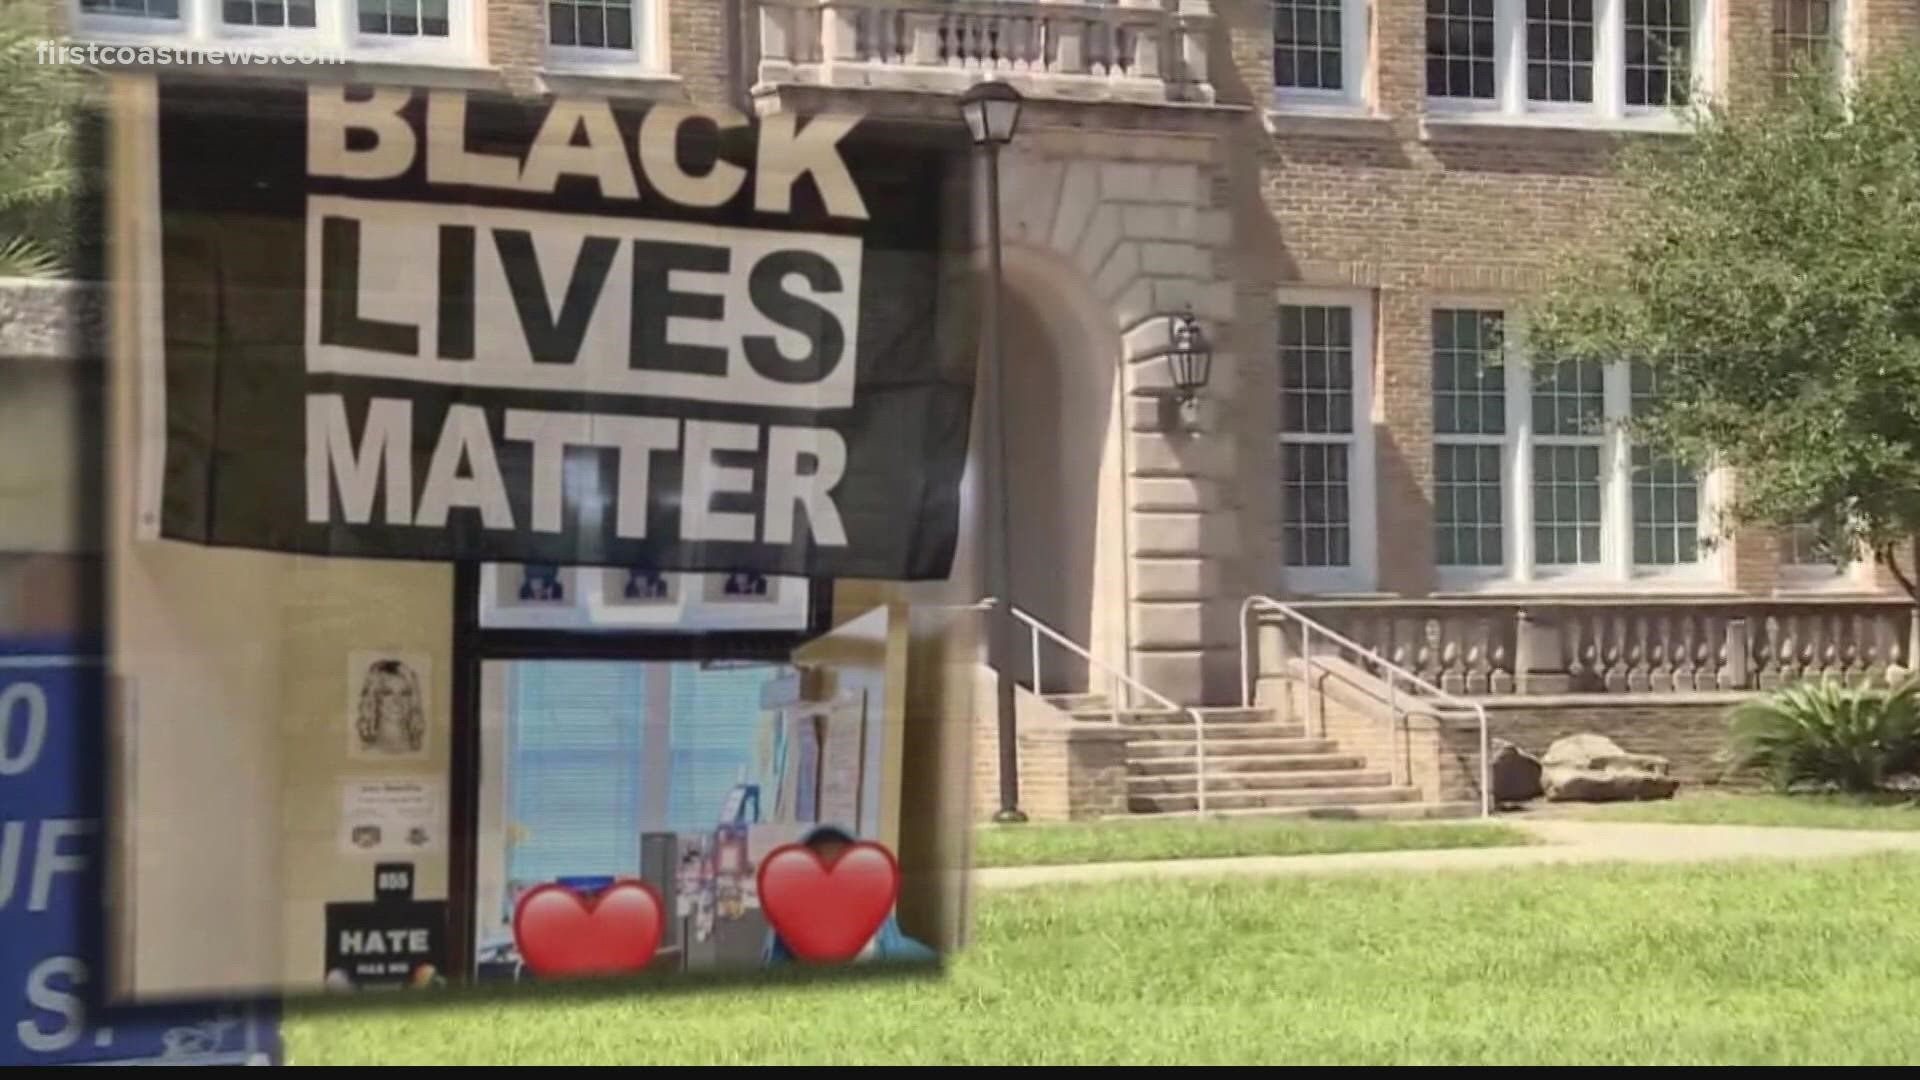 Amy Donofrio's activism put her at the center of debate after she declined to take down a Black Lives Matter sign from over her classroom door.